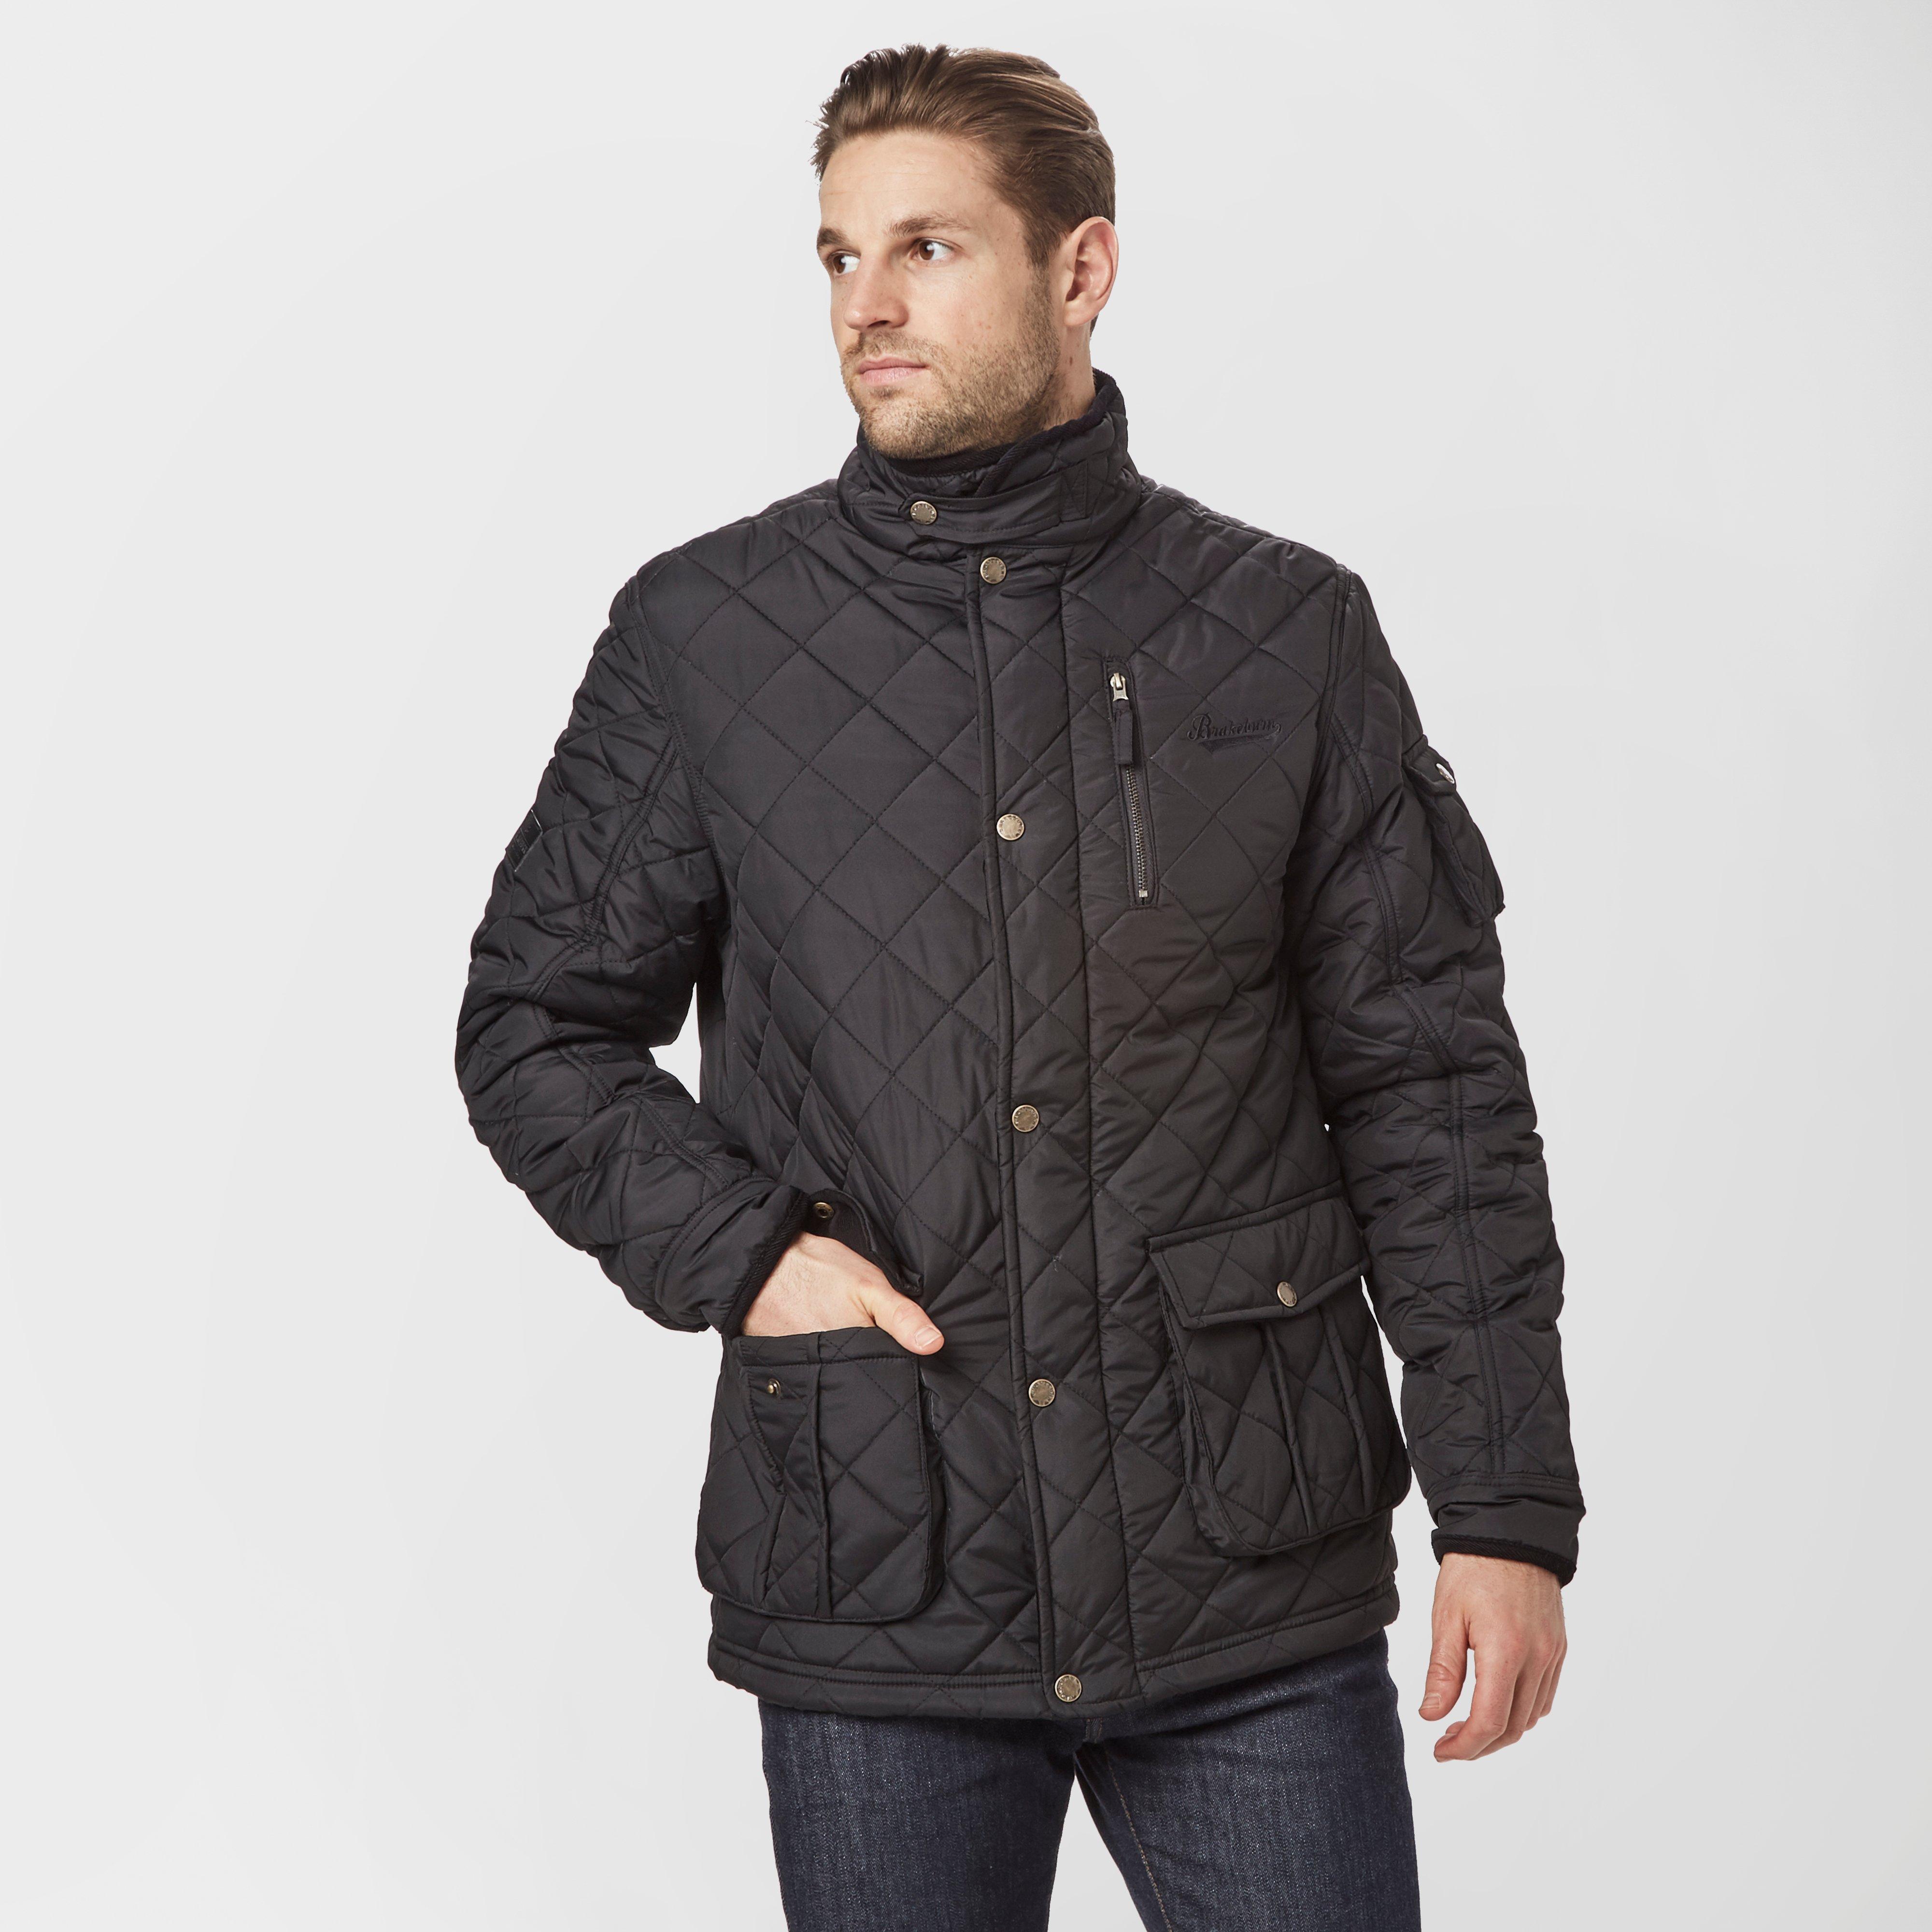 Brakeburn Quilted Jacket – Men’s | Compare outdoor jacket prices at ...